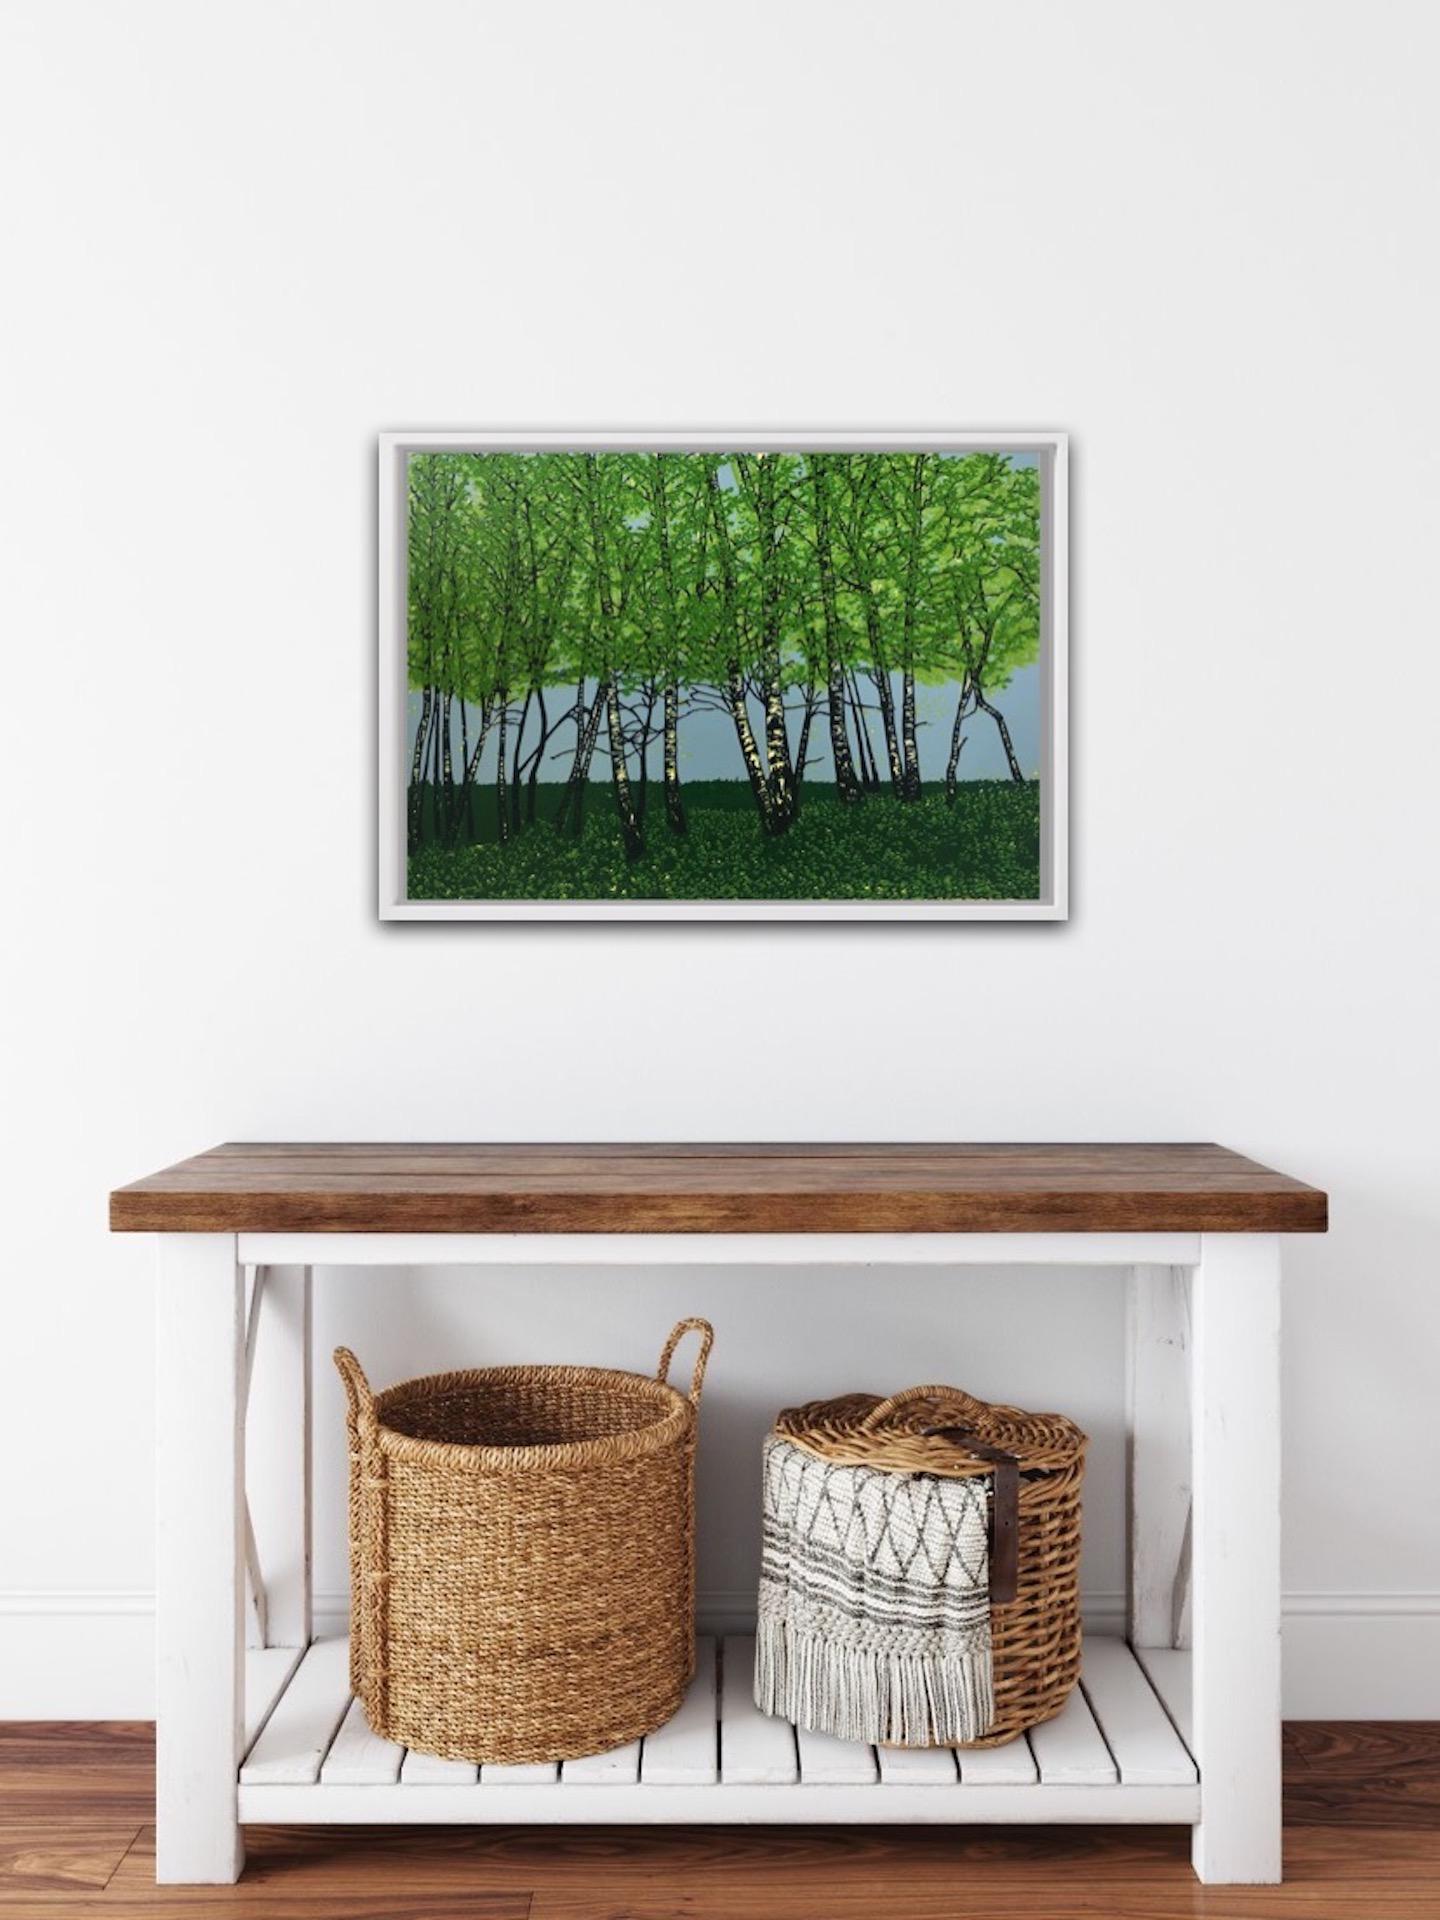 Jennifer Jokhoo
Summer Birches
Limited Edition Linocut
Image Size: H 45cm x W 57cm
Signed
Sold Mounted but Unframed
(Please note that in situ images are purely an indication of how a piece may look).

Summer Birches is a limited edition Reduction